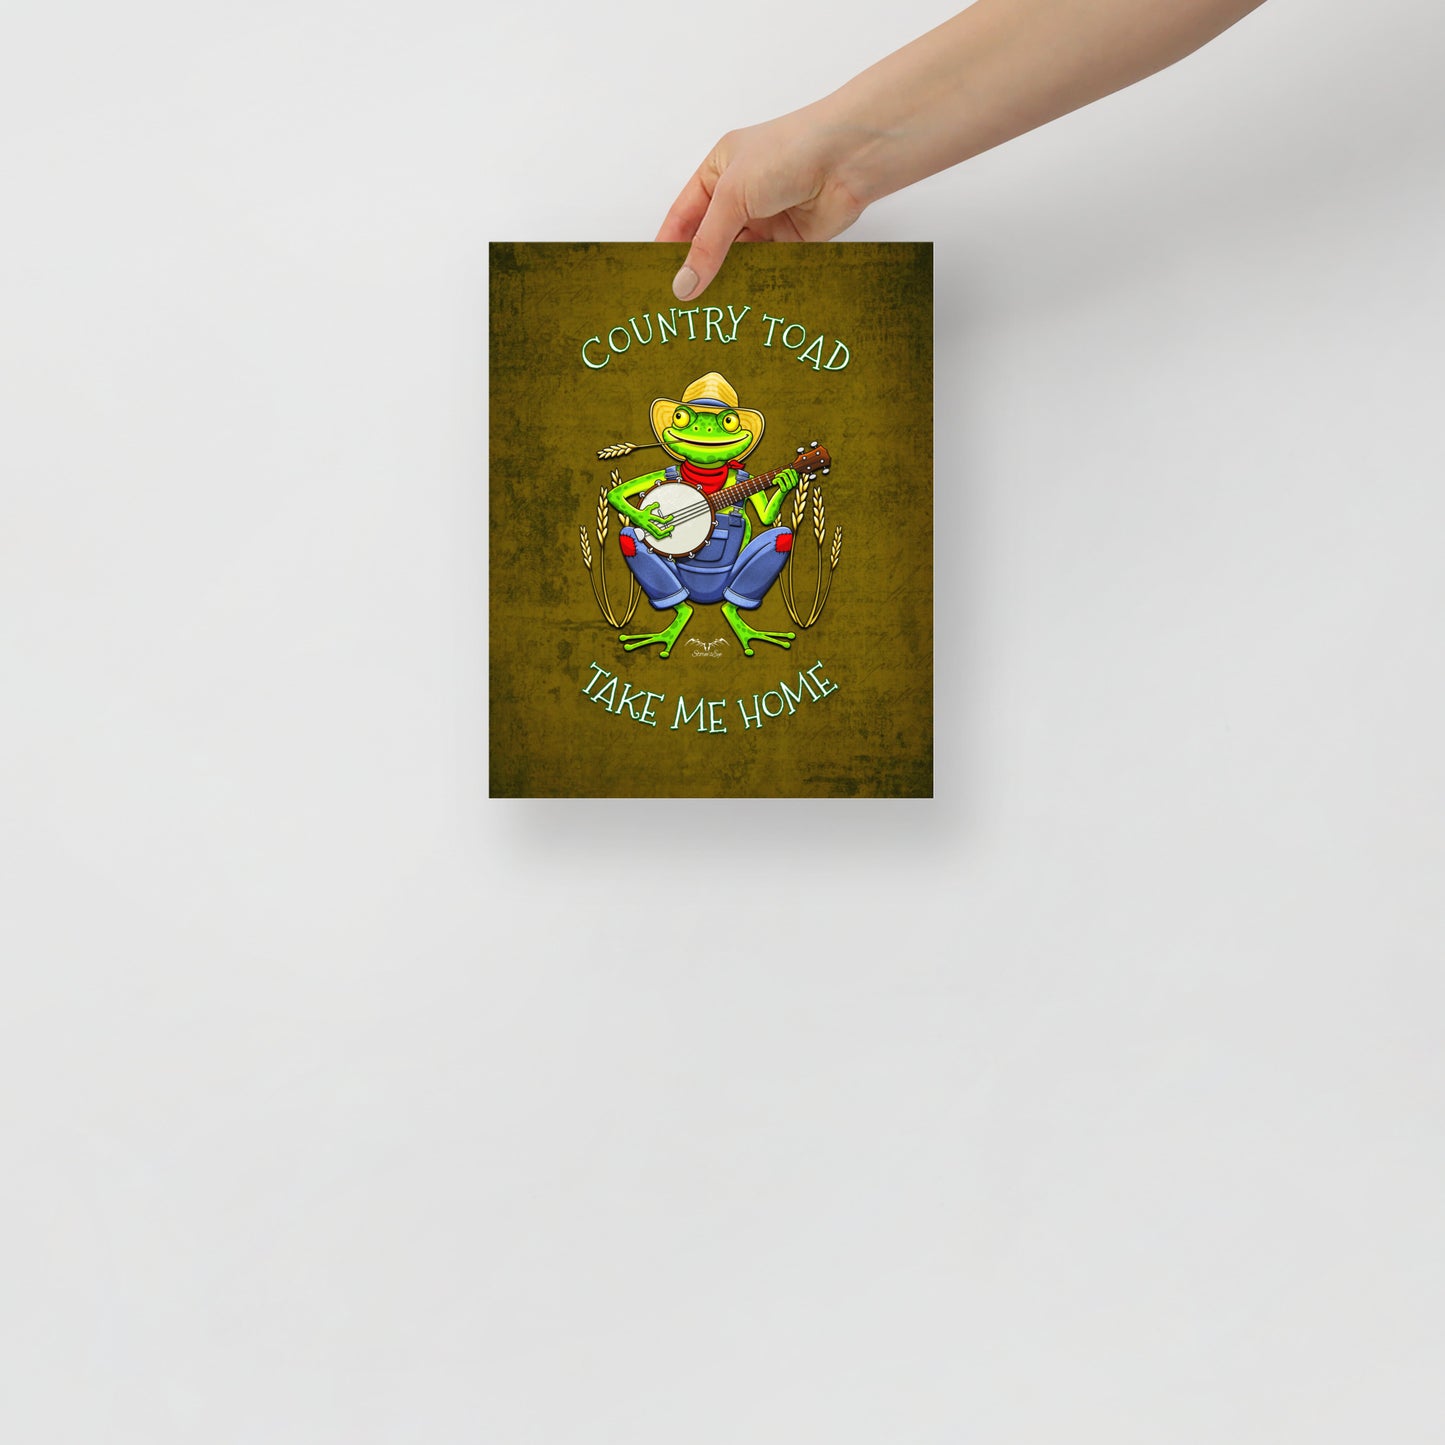 Country Toad Art Print | Yellow Hillbilly Frog Poster | Museum Quality | Unframed